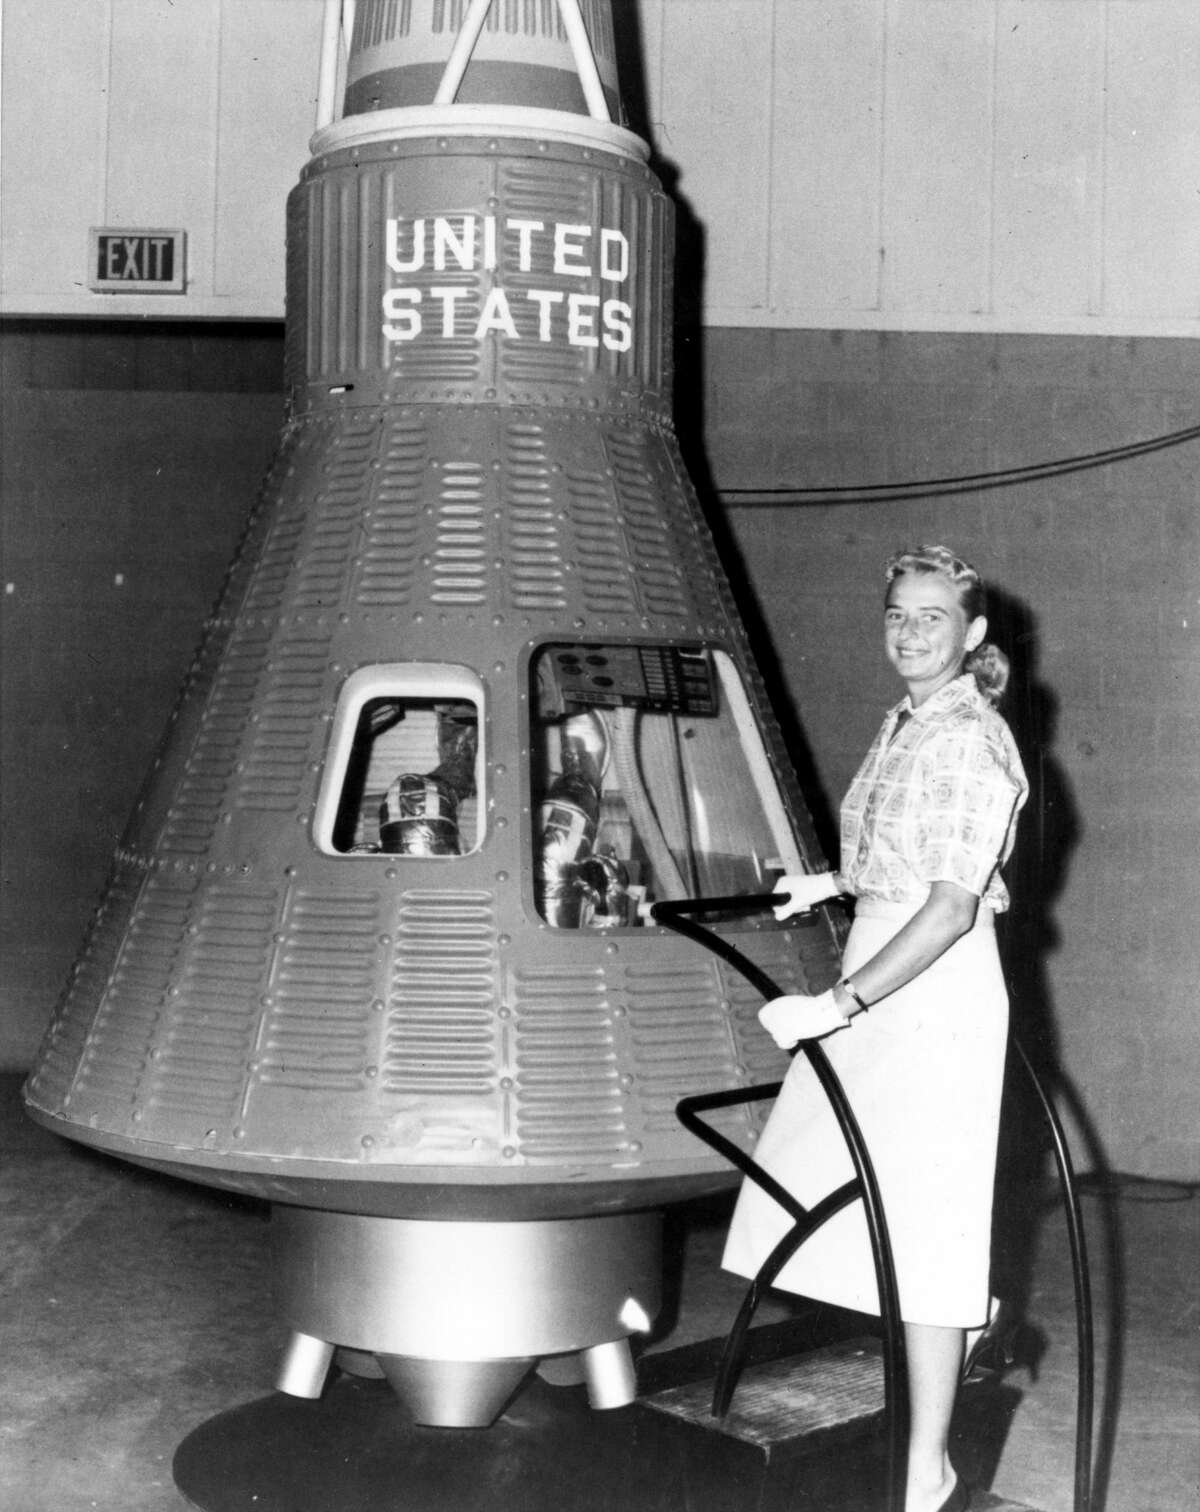 Jerrie Cobb poses next to a Mercury spaceship capsule. Although she never flew in space, Cobb, along with twenty-four other women, underwent physical tests similar to those taken by the Mercury astronauts with the belief that she might become an astronaut trainee. All the women who participated in the program, known as First Lady Astronaut Trainees, were skilled pilots. Dr. Randy Lovelace, a NASA scientist who had conducted the official Mercury program physicals, administered the tests at his private clinic without official NASA sanction. Cobb passed all the training exercises, ranking in the top 2% of all astronaut candidates of both genders. While she was sworn in as a consultant to Administrator James Webb on the issue of women in space, mounting political pressure and internal opposition lead NASA to restrict its official astronaut training program to men despite campaigning by the thirteen finalists of the FLAT program. After three years, Cobb left NASA for the jungles of the Amazon, where she has spent four decades as a solo pilot delivering food, medicine, and other aid to the indigenous people. She has received the Amelia Earhart Medal, the Harmon Trophy, the Pioneer Woman Award, the Bishop Wright Air Industry Award, and many other decorations for her tireless years of humanitarian service.